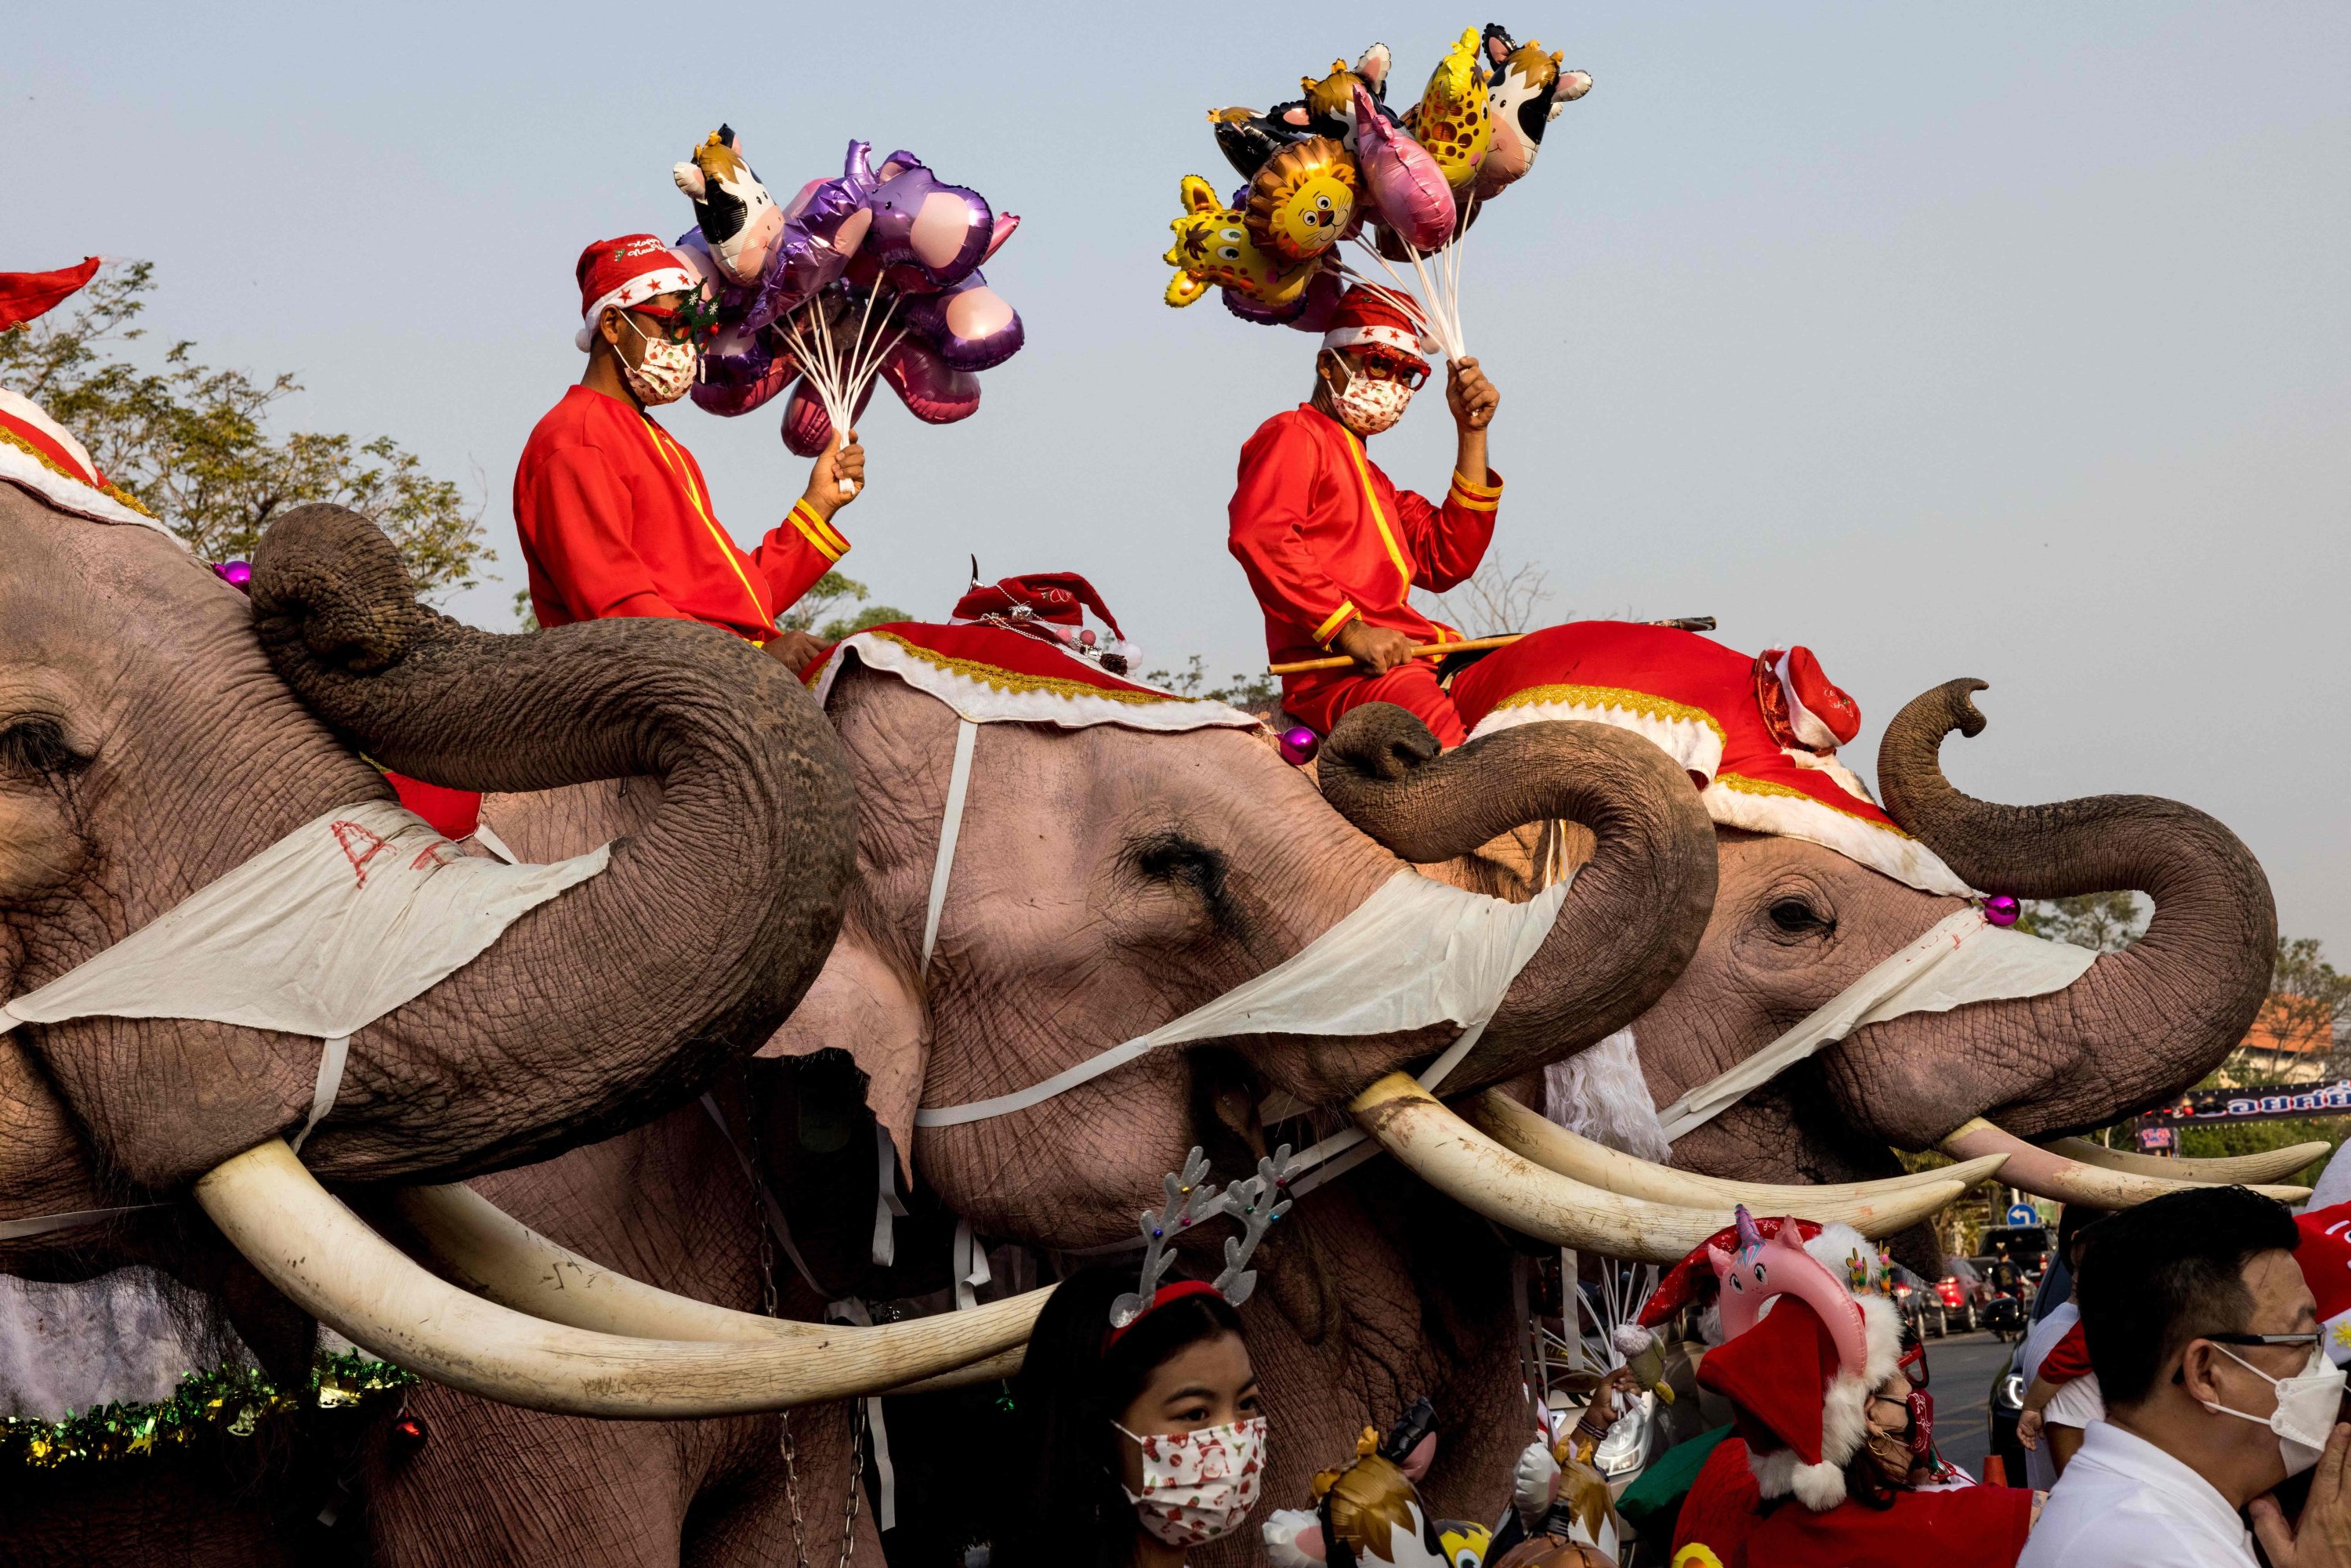 Mahouts and their elephants pose for children during Christmas celebrations at the Jirasart Witthaya school in Ayutthaya, Thailand, December 24, 2021. (AFP Photo)